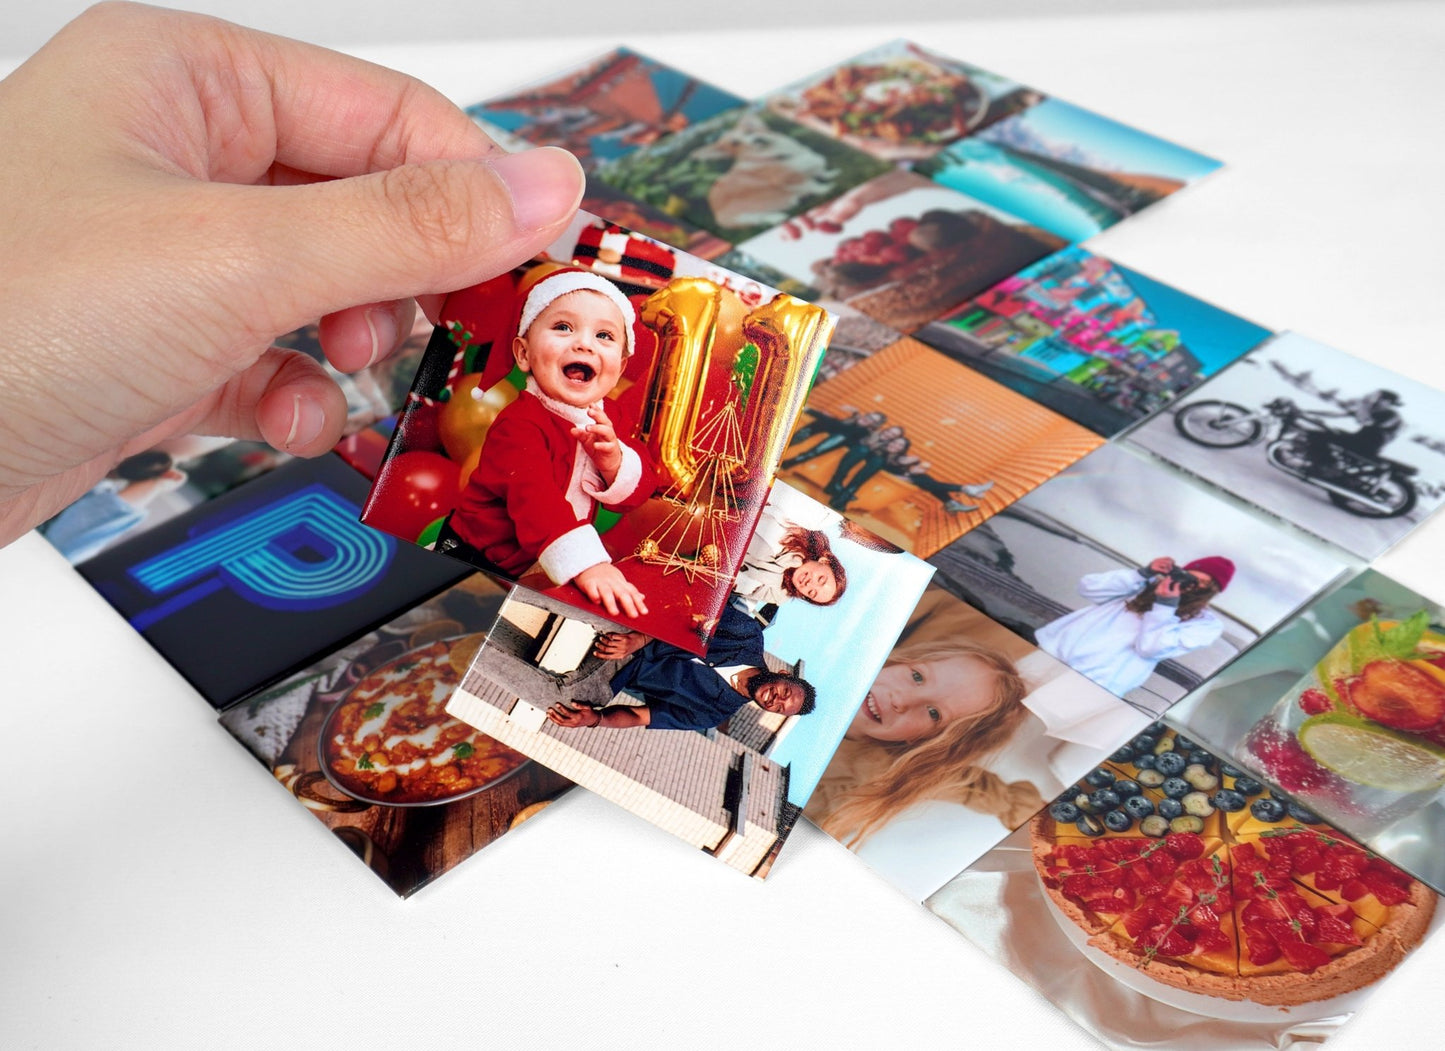 Fridge Magnet | Square photo magnet - Lalapic | A hand holding a cute square photo magnet feature a photo of a kid wearing Christmas costumes.